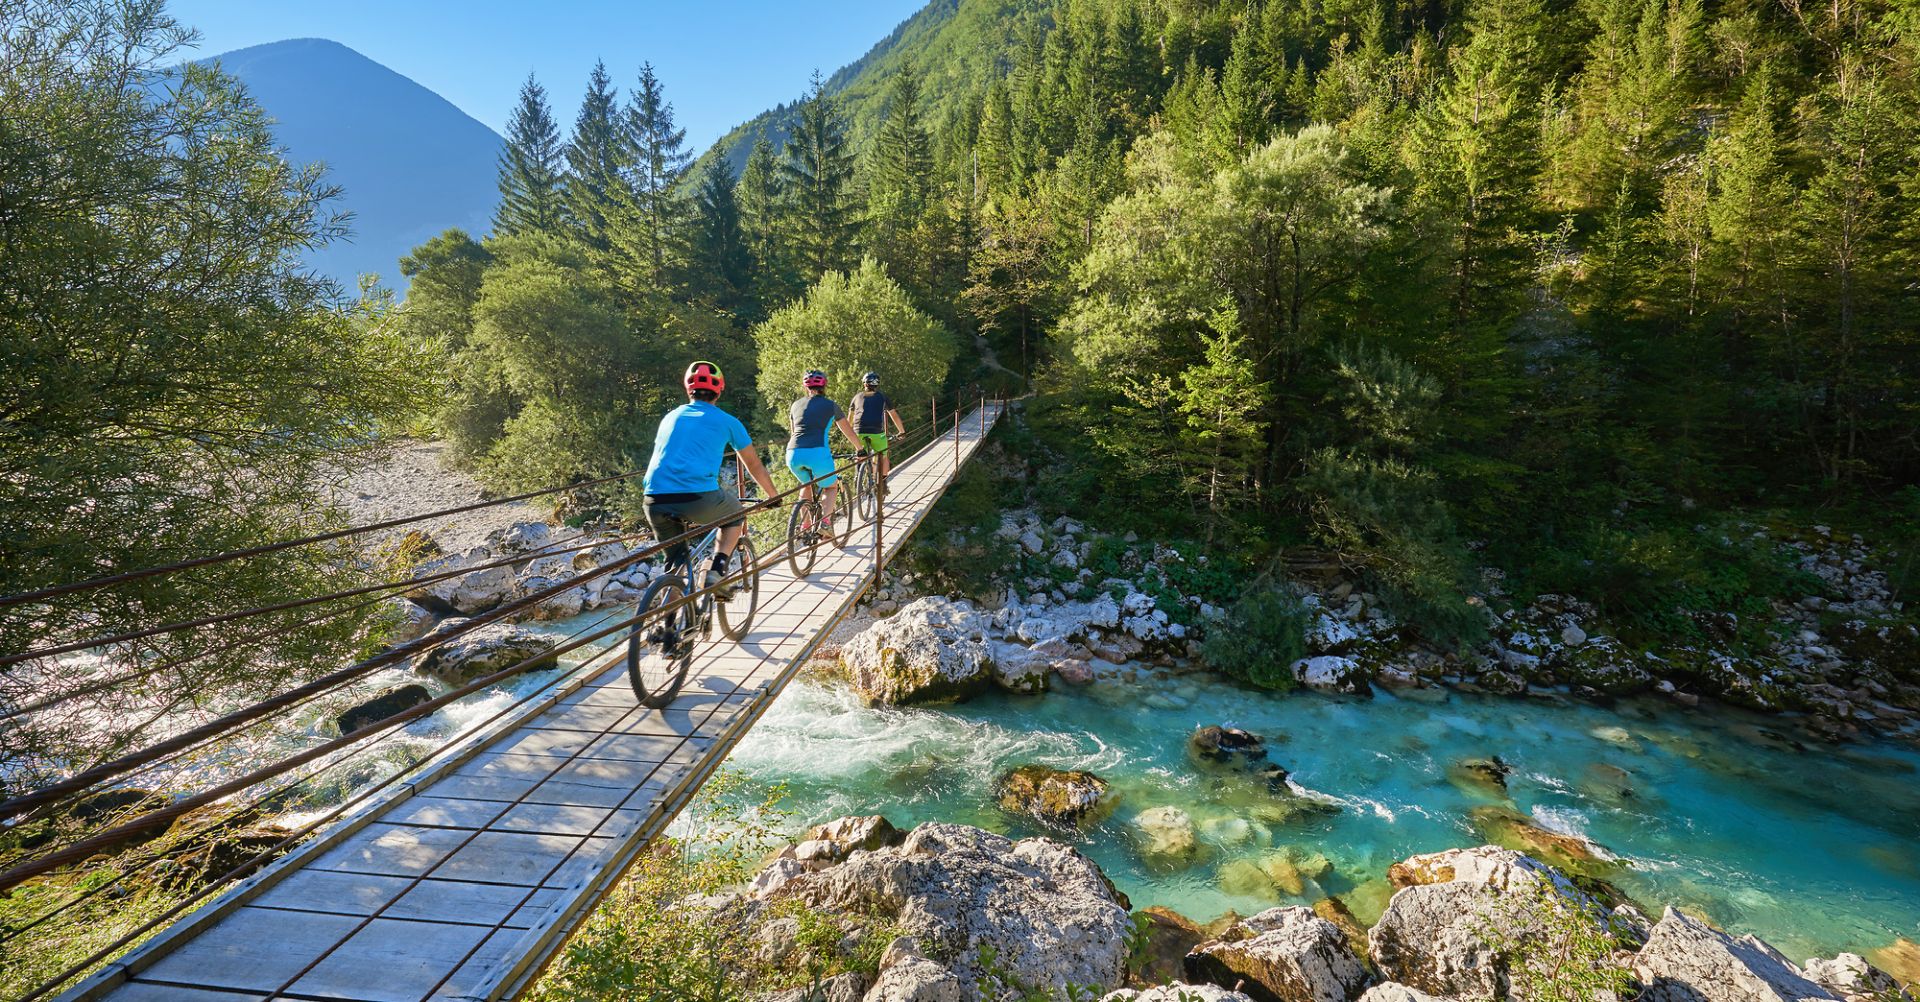 The Trans Dinarica Cycle Route, which starts in Slovenia, is named